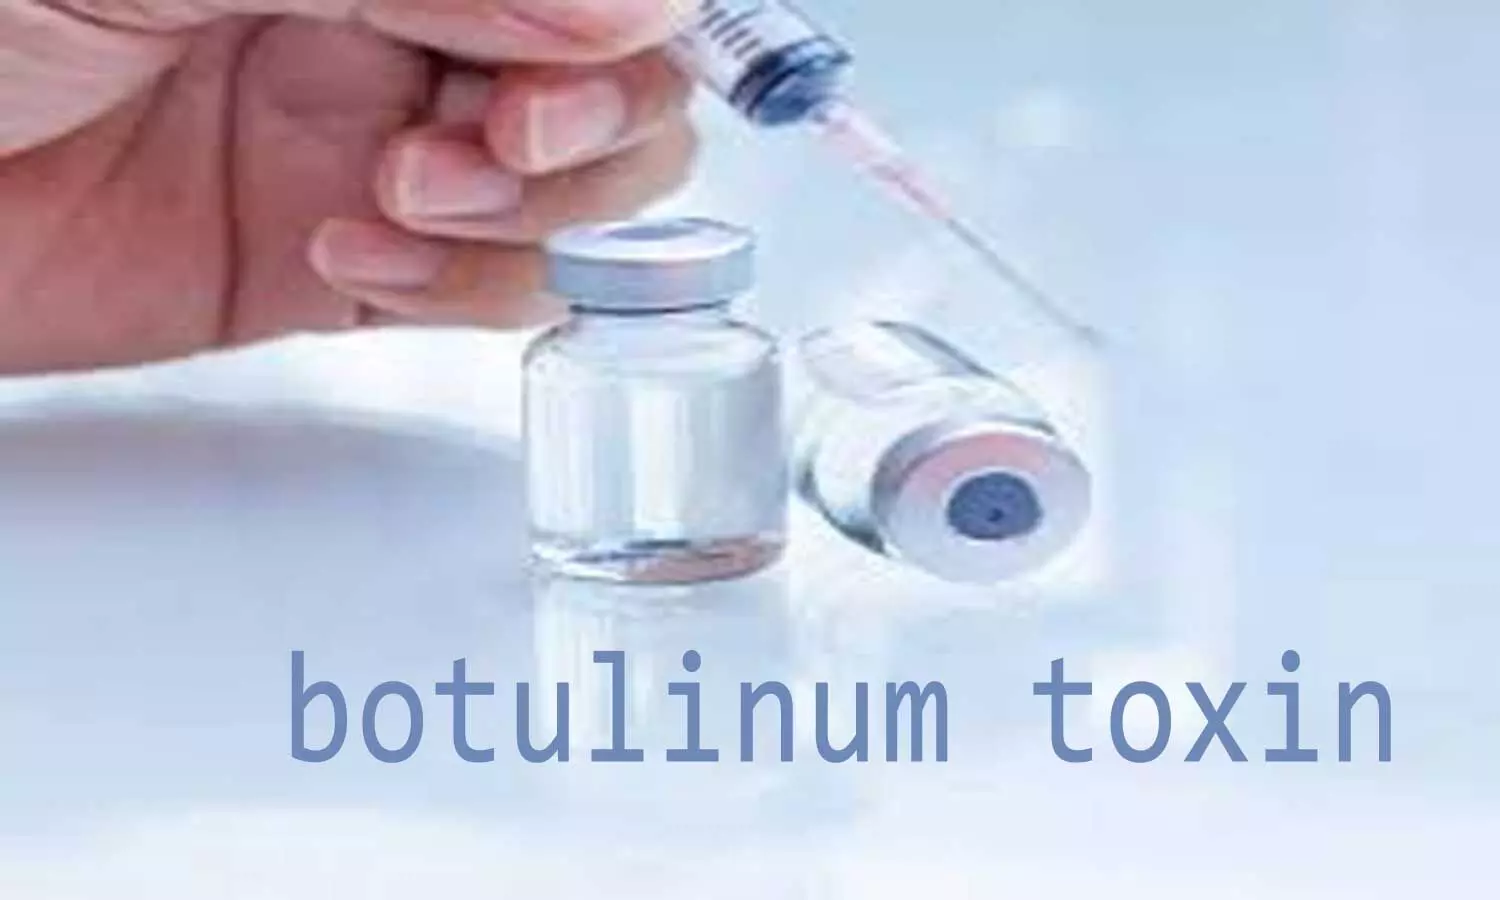 Botulinum toxin safe and effective for spasmodic dysphonia treatment: BOISS Study